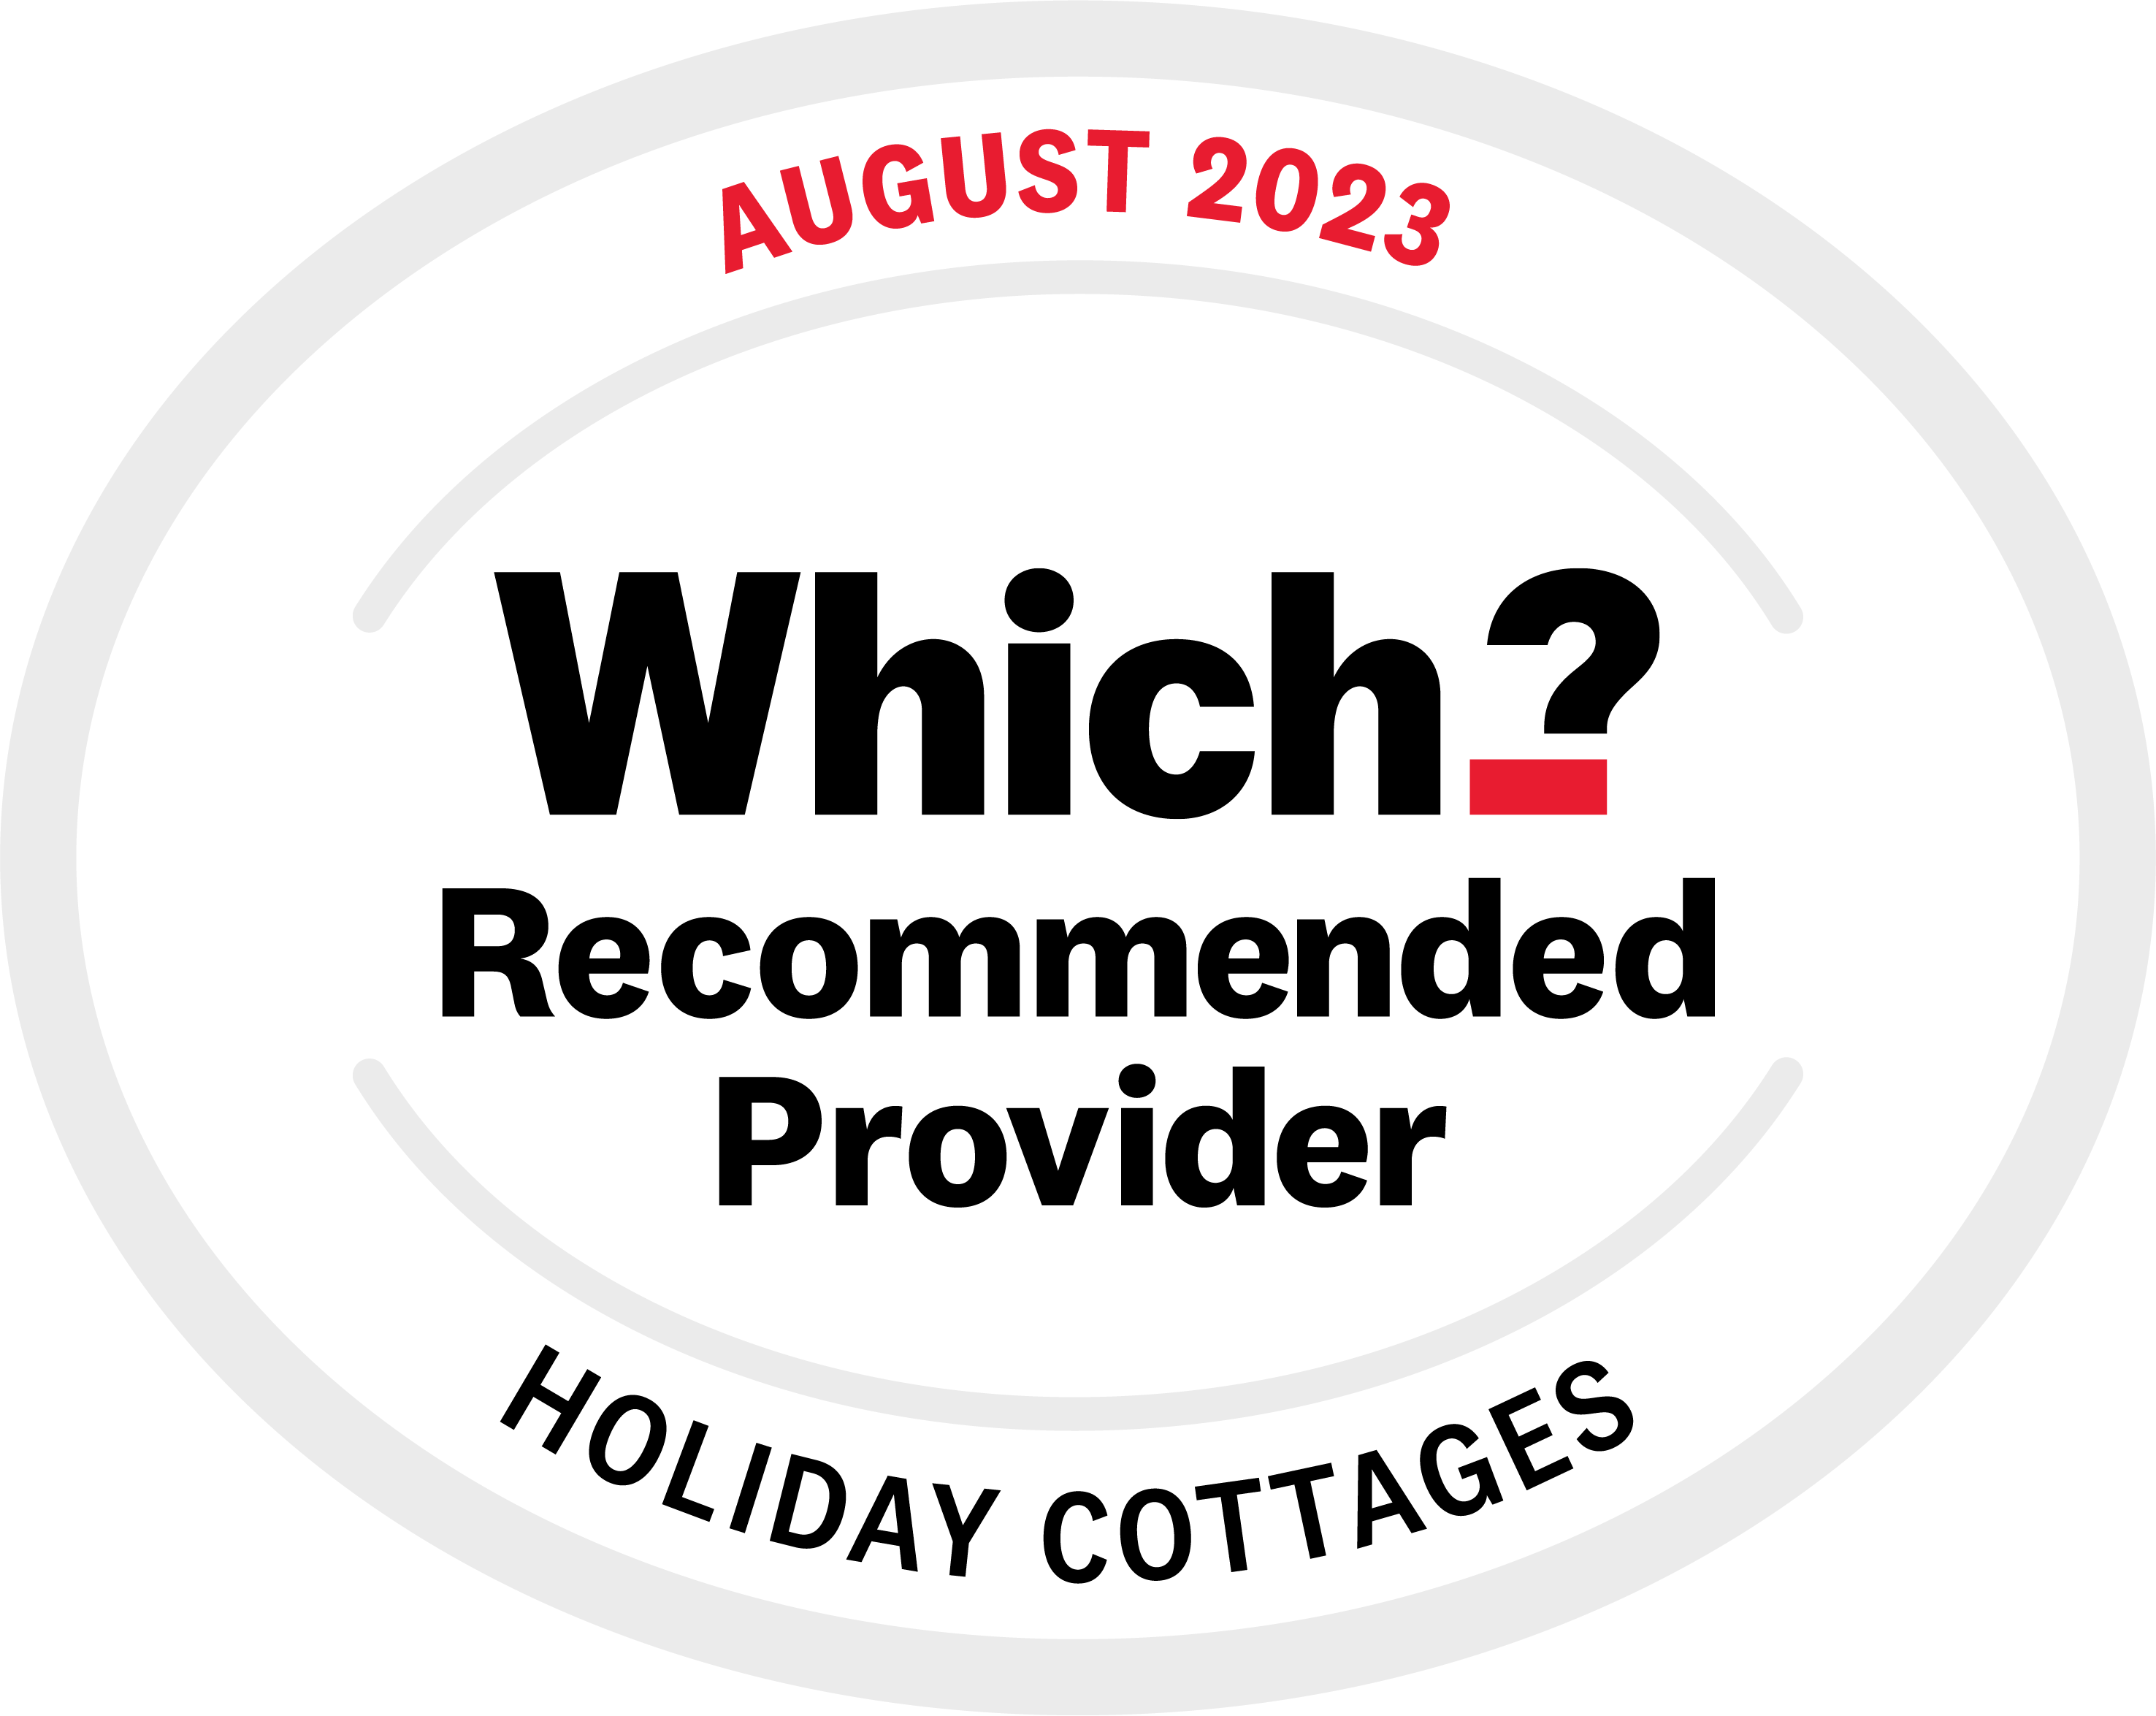 Which? recommended provider logo - holiday cottages August 2023